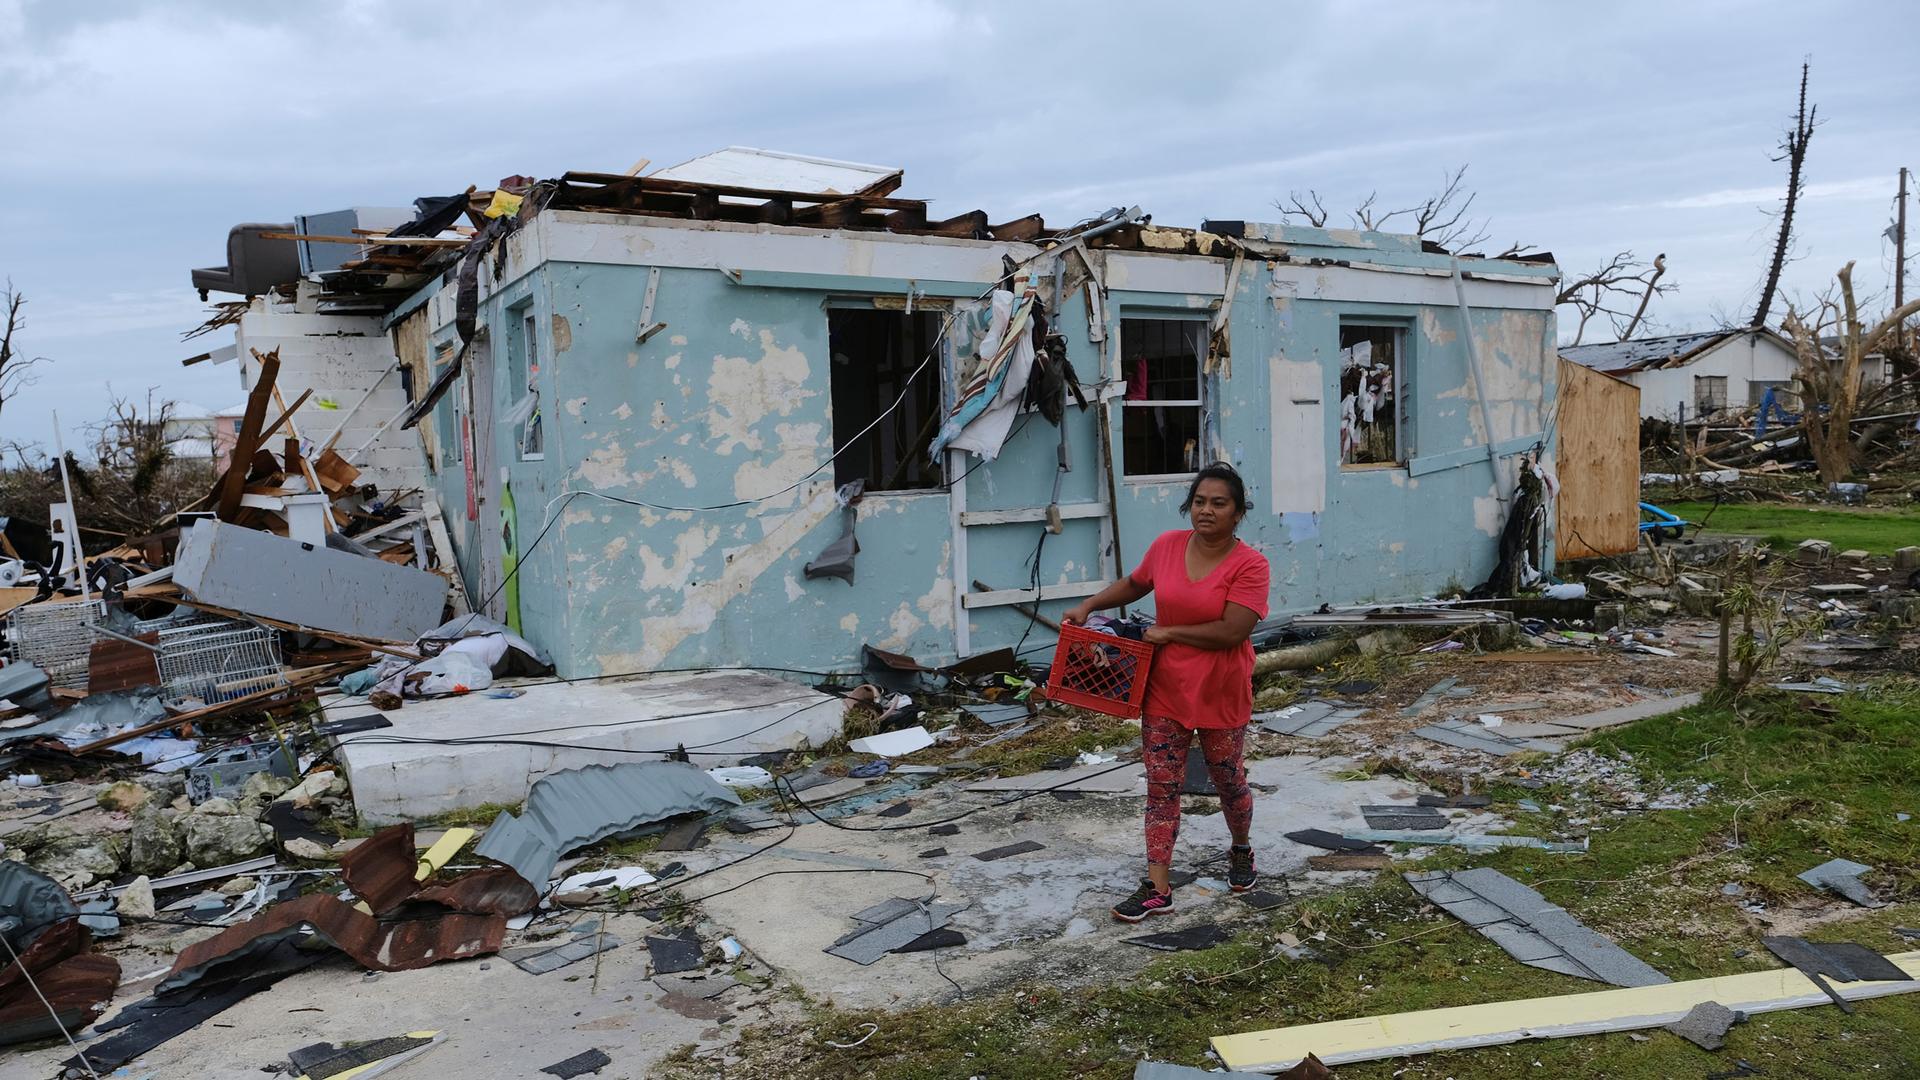 A woman is shown wearing a red shirt and walking with a crate next to a heavily damaged home.